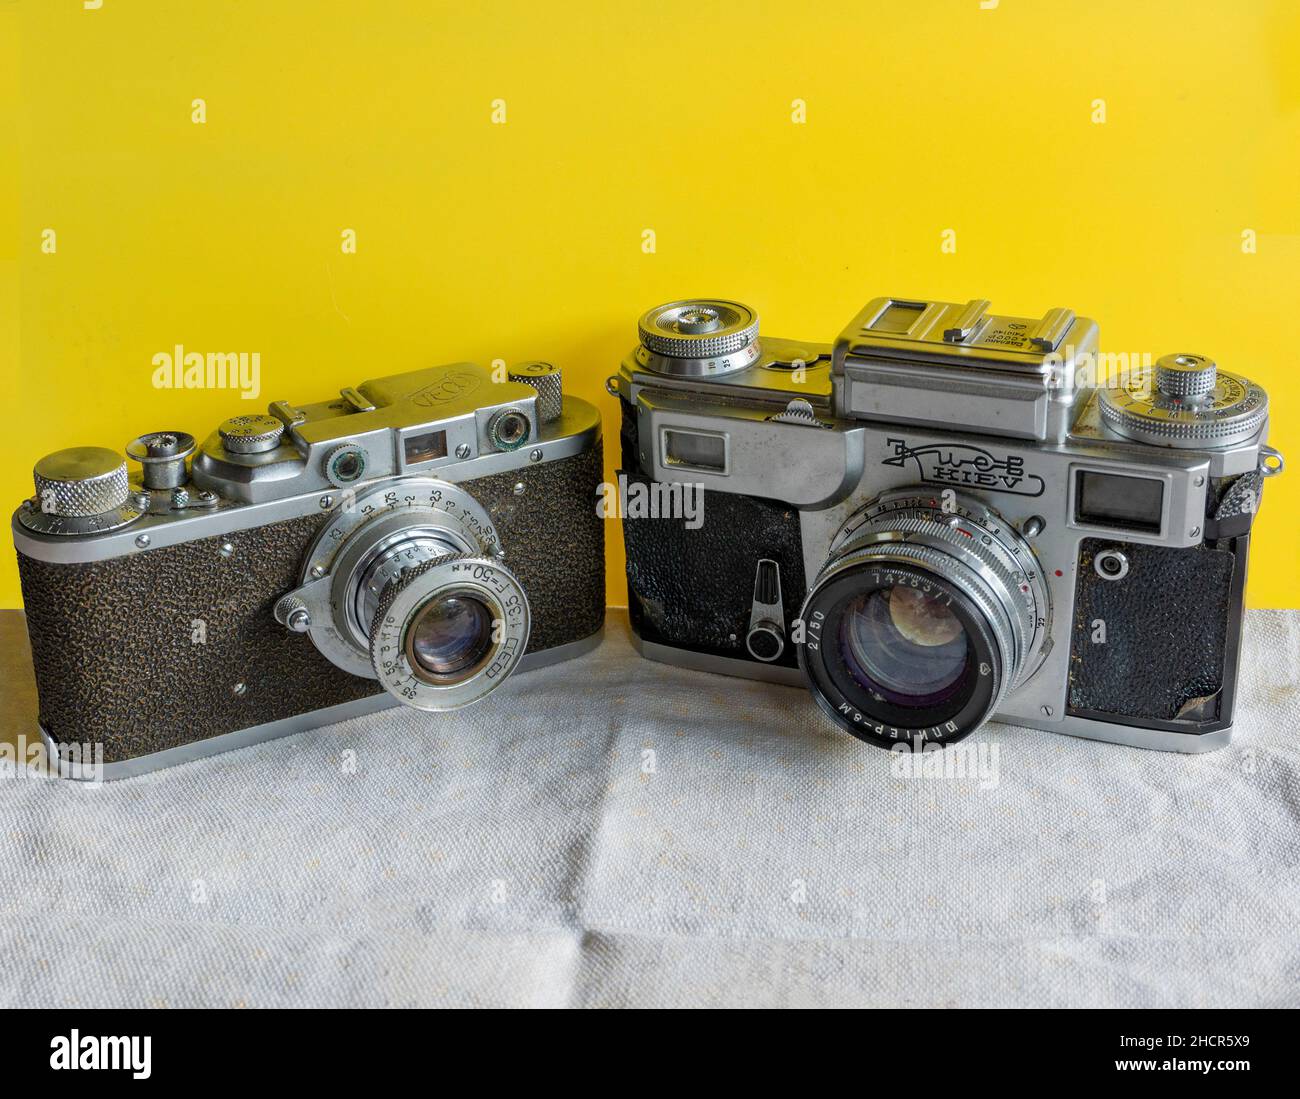 An old war correspondent's cameras lies on a tablecloth against a yellow background Stock Photo